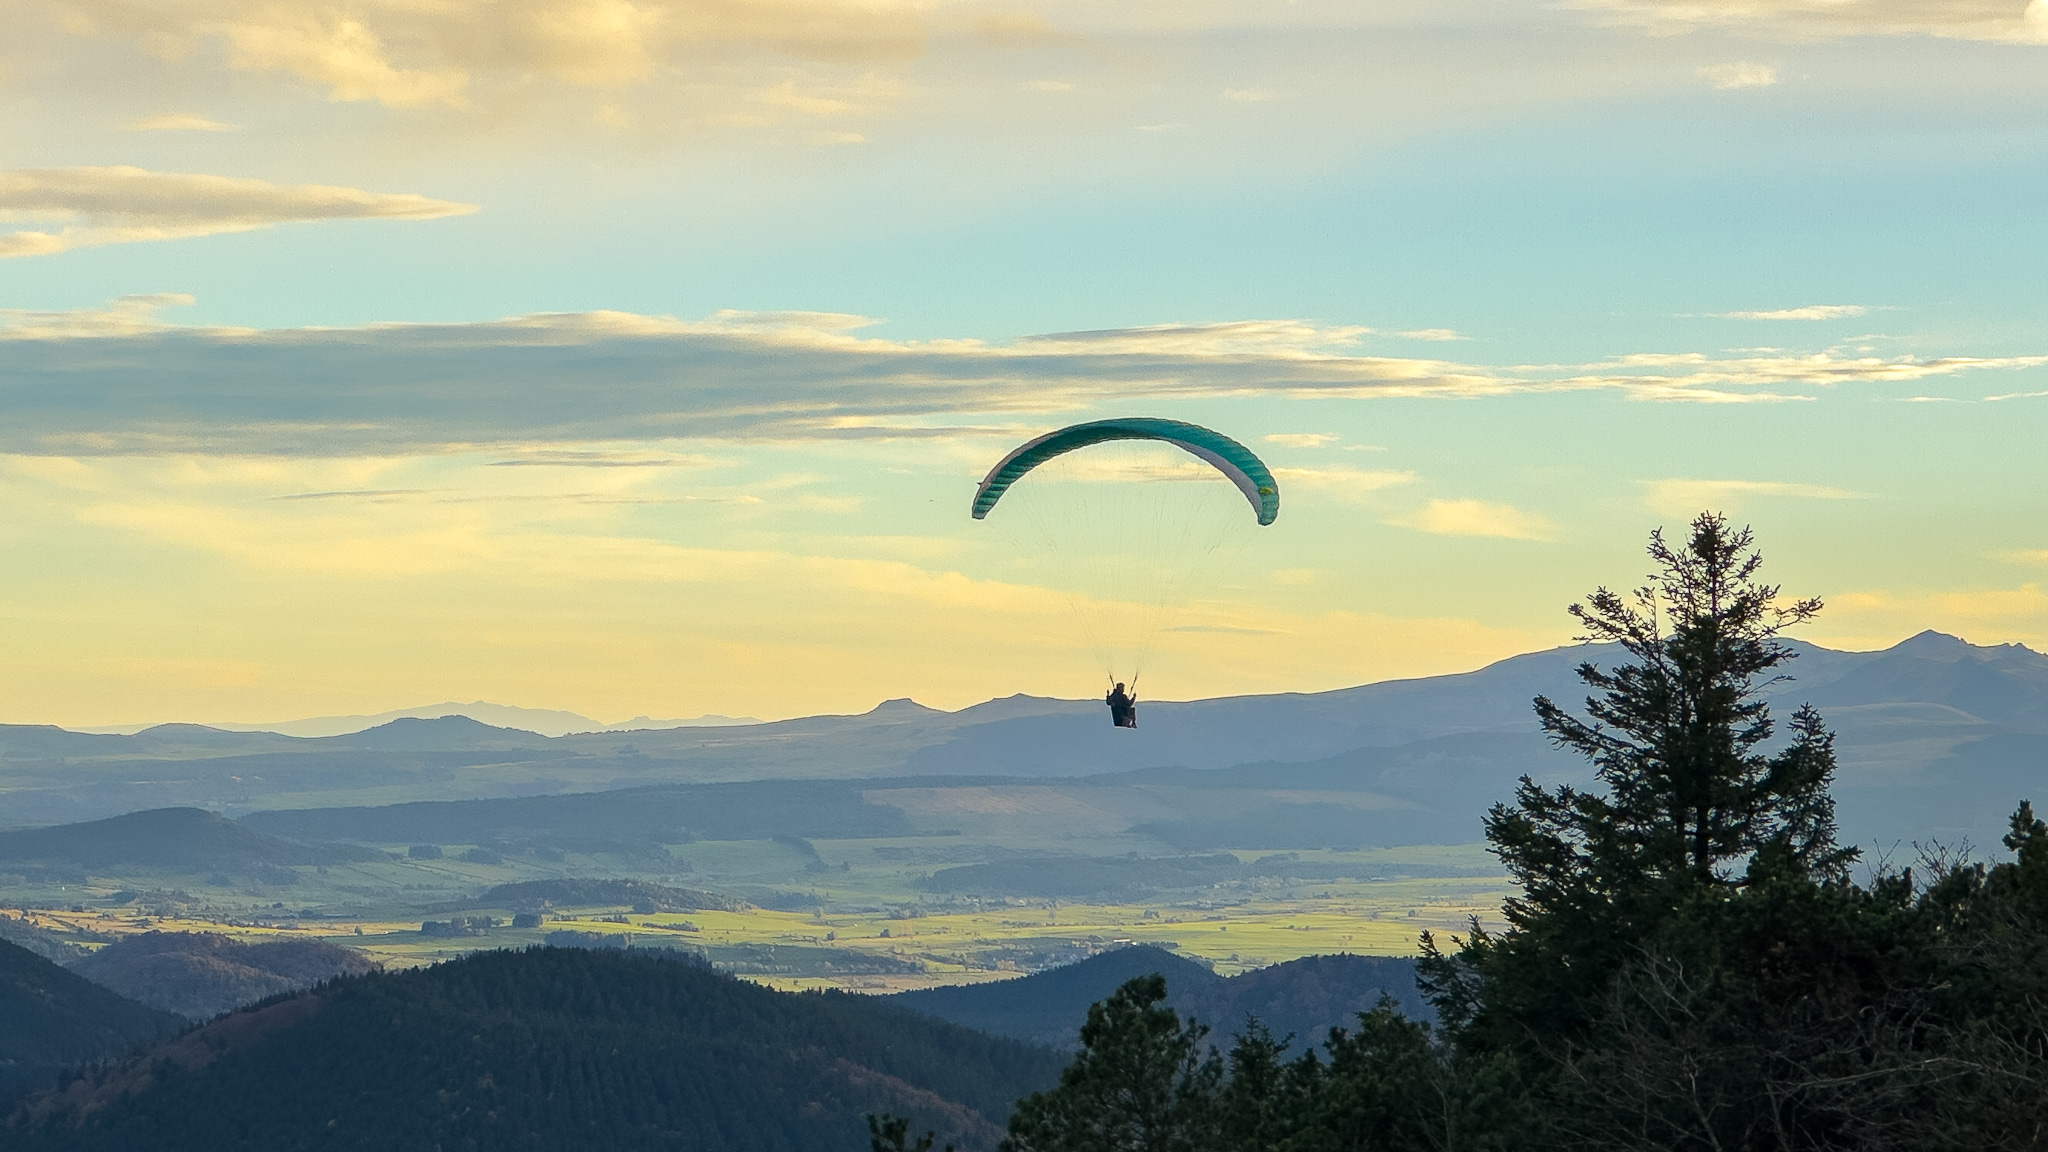 Paragliding at the top of the Puy de Dôme with a view of the Massif des Dores